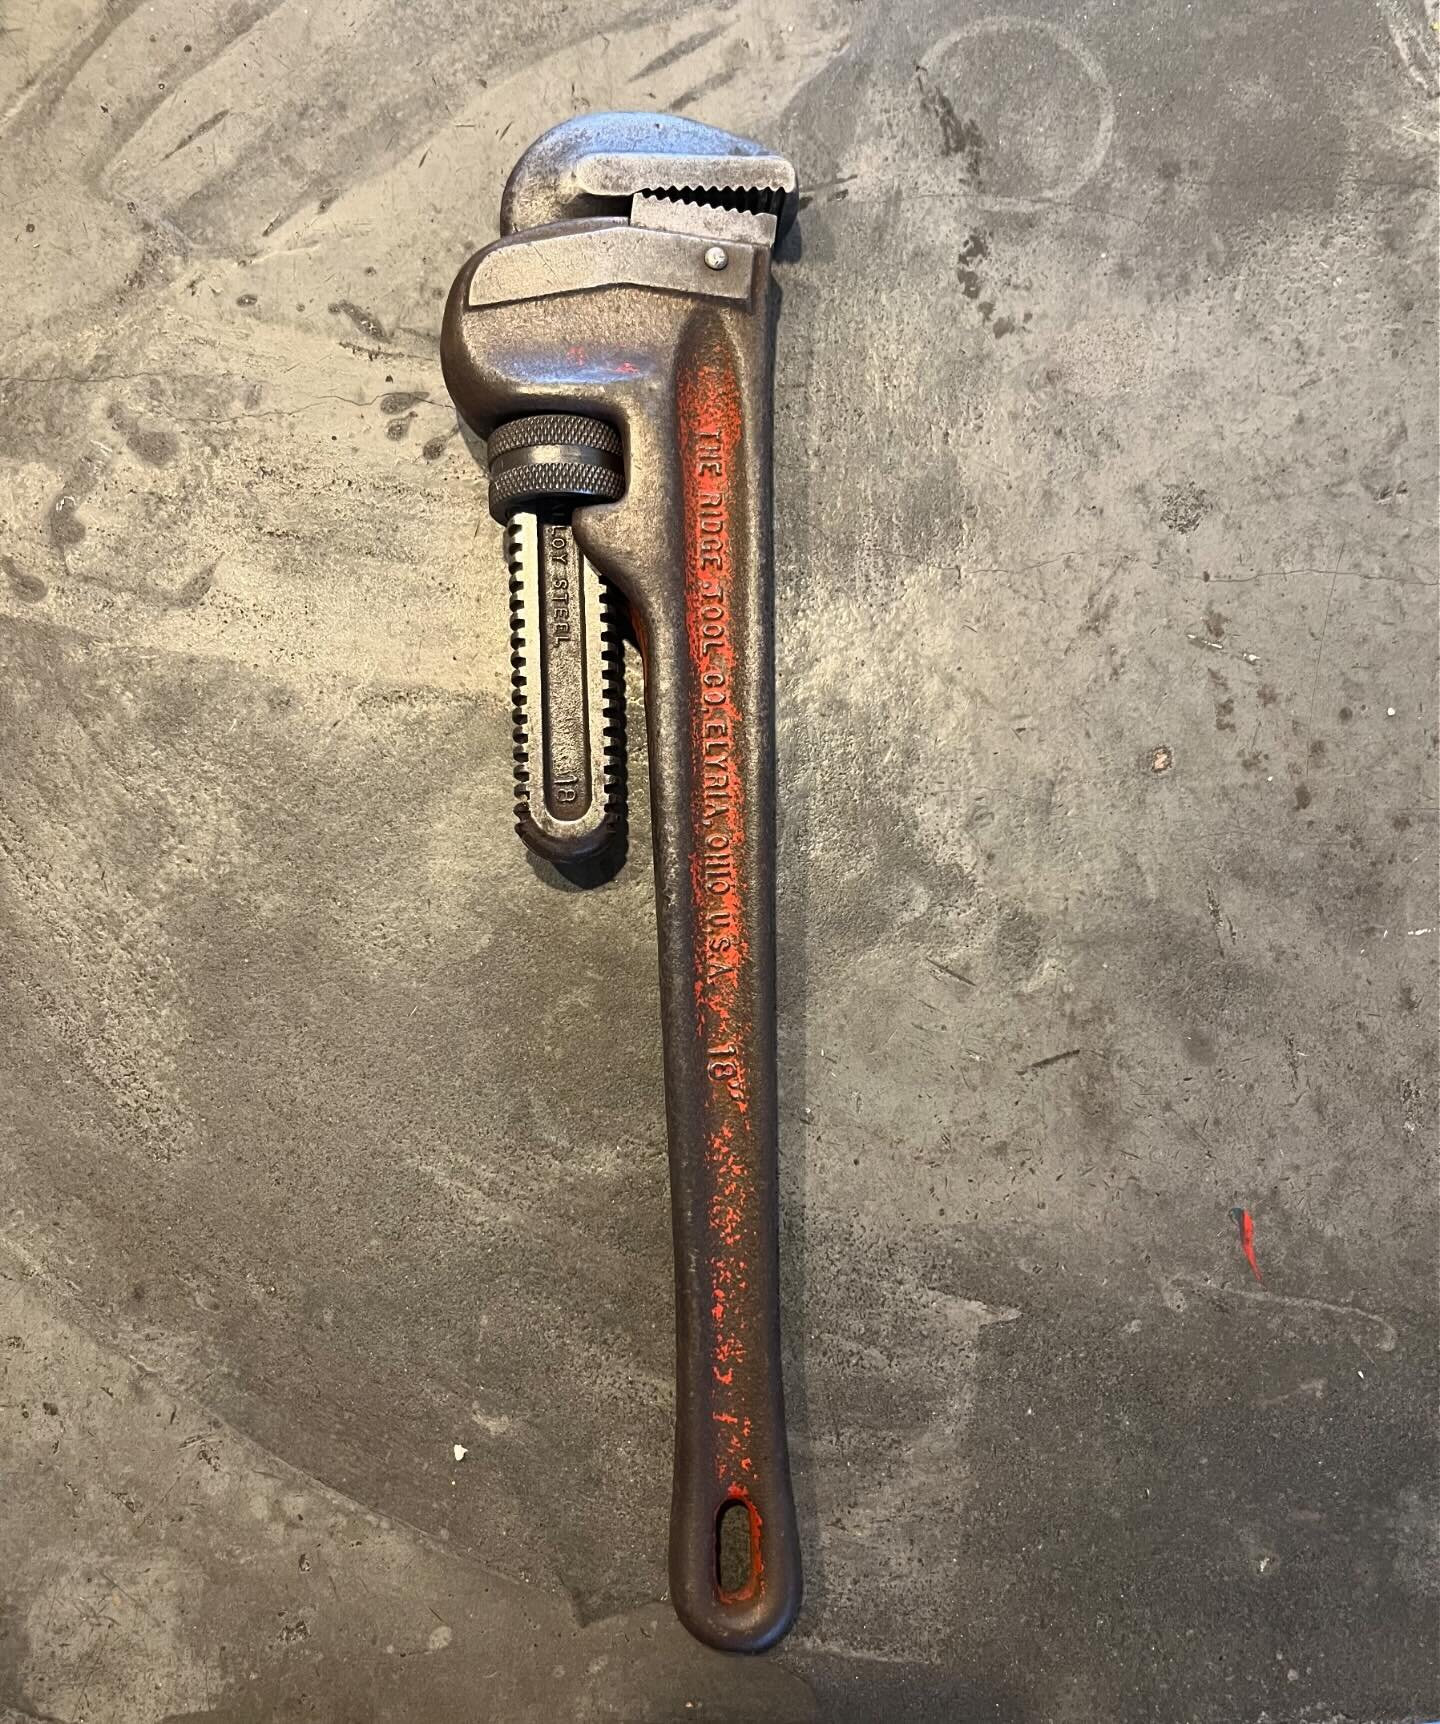 One of my favourite hobbies is restoring old vintage tools I find on junk removal jobs! I love restoring them to their former glory and putting them back to work in my shop!! This old Rigid pipe wrench and Venlic Vice turned out amazing. I forgot bef